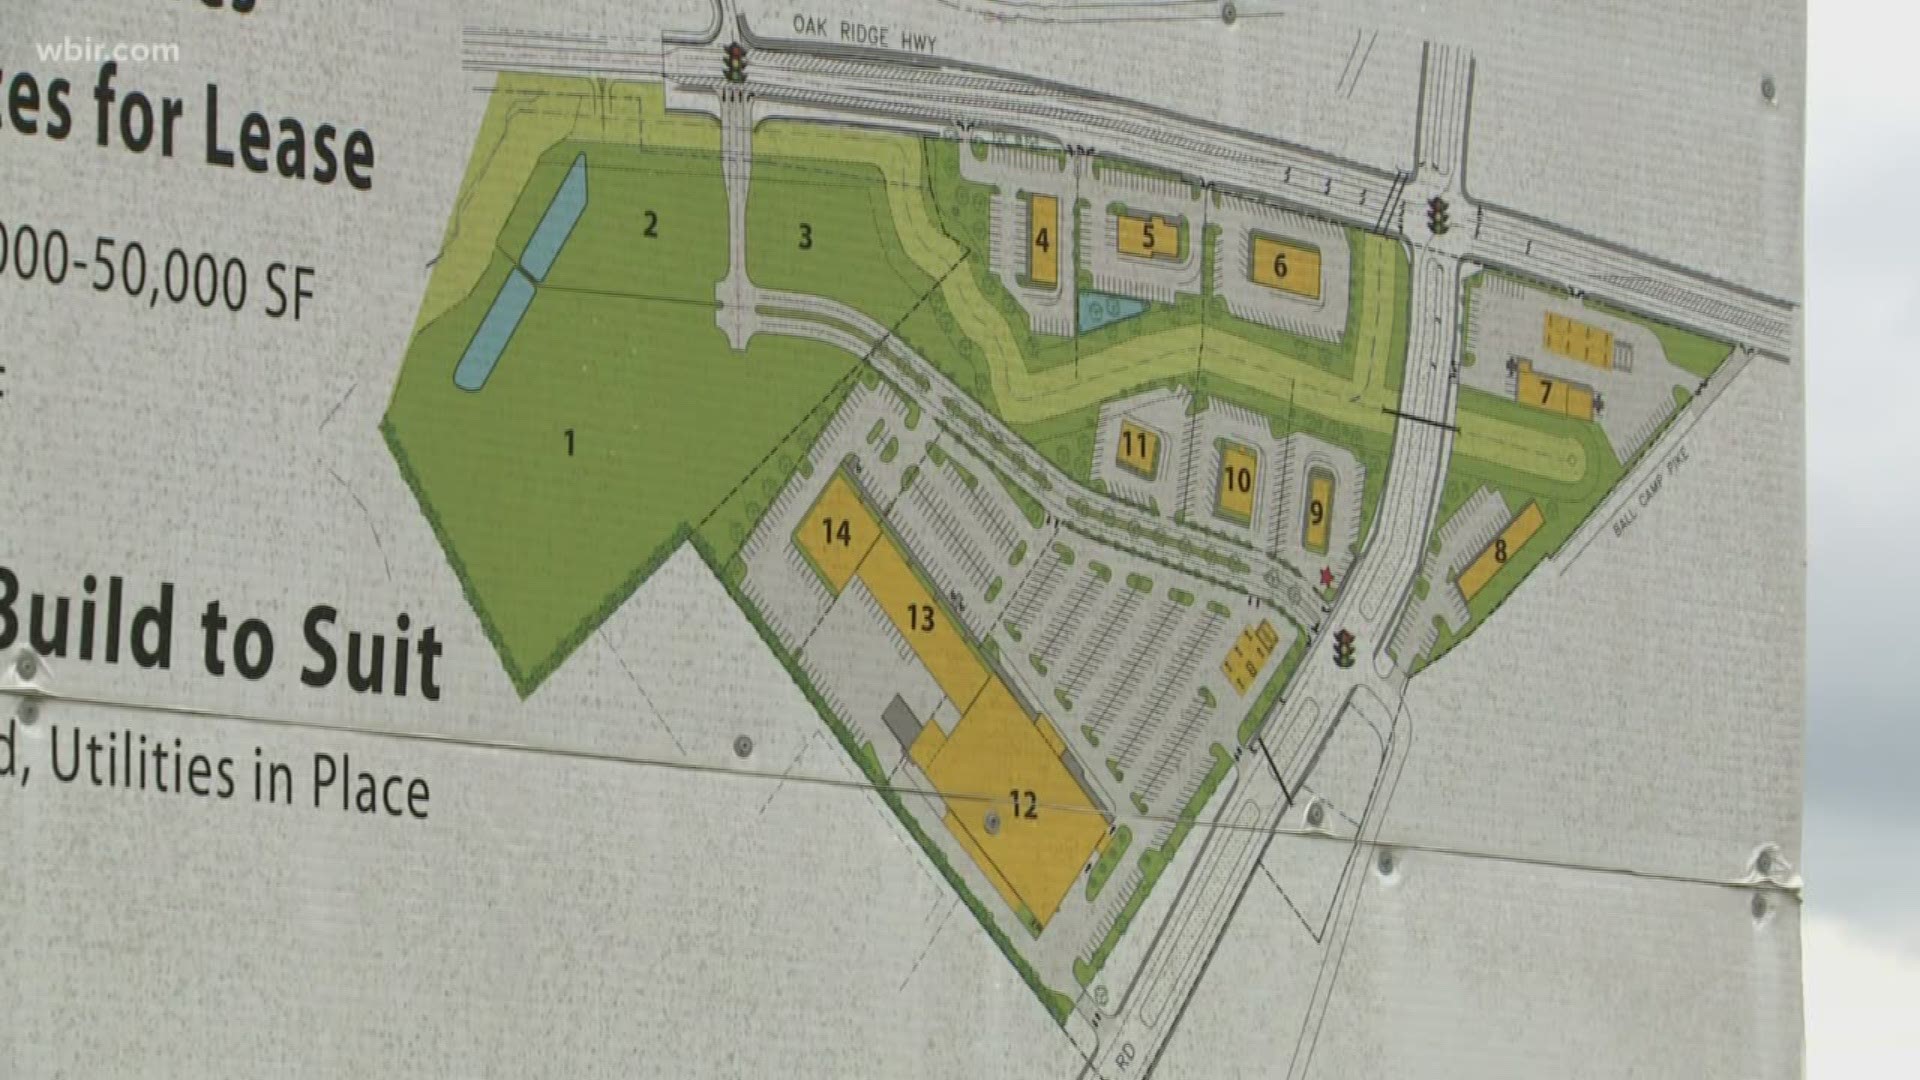 County leaders are moving forward on a major projects in Knox County.